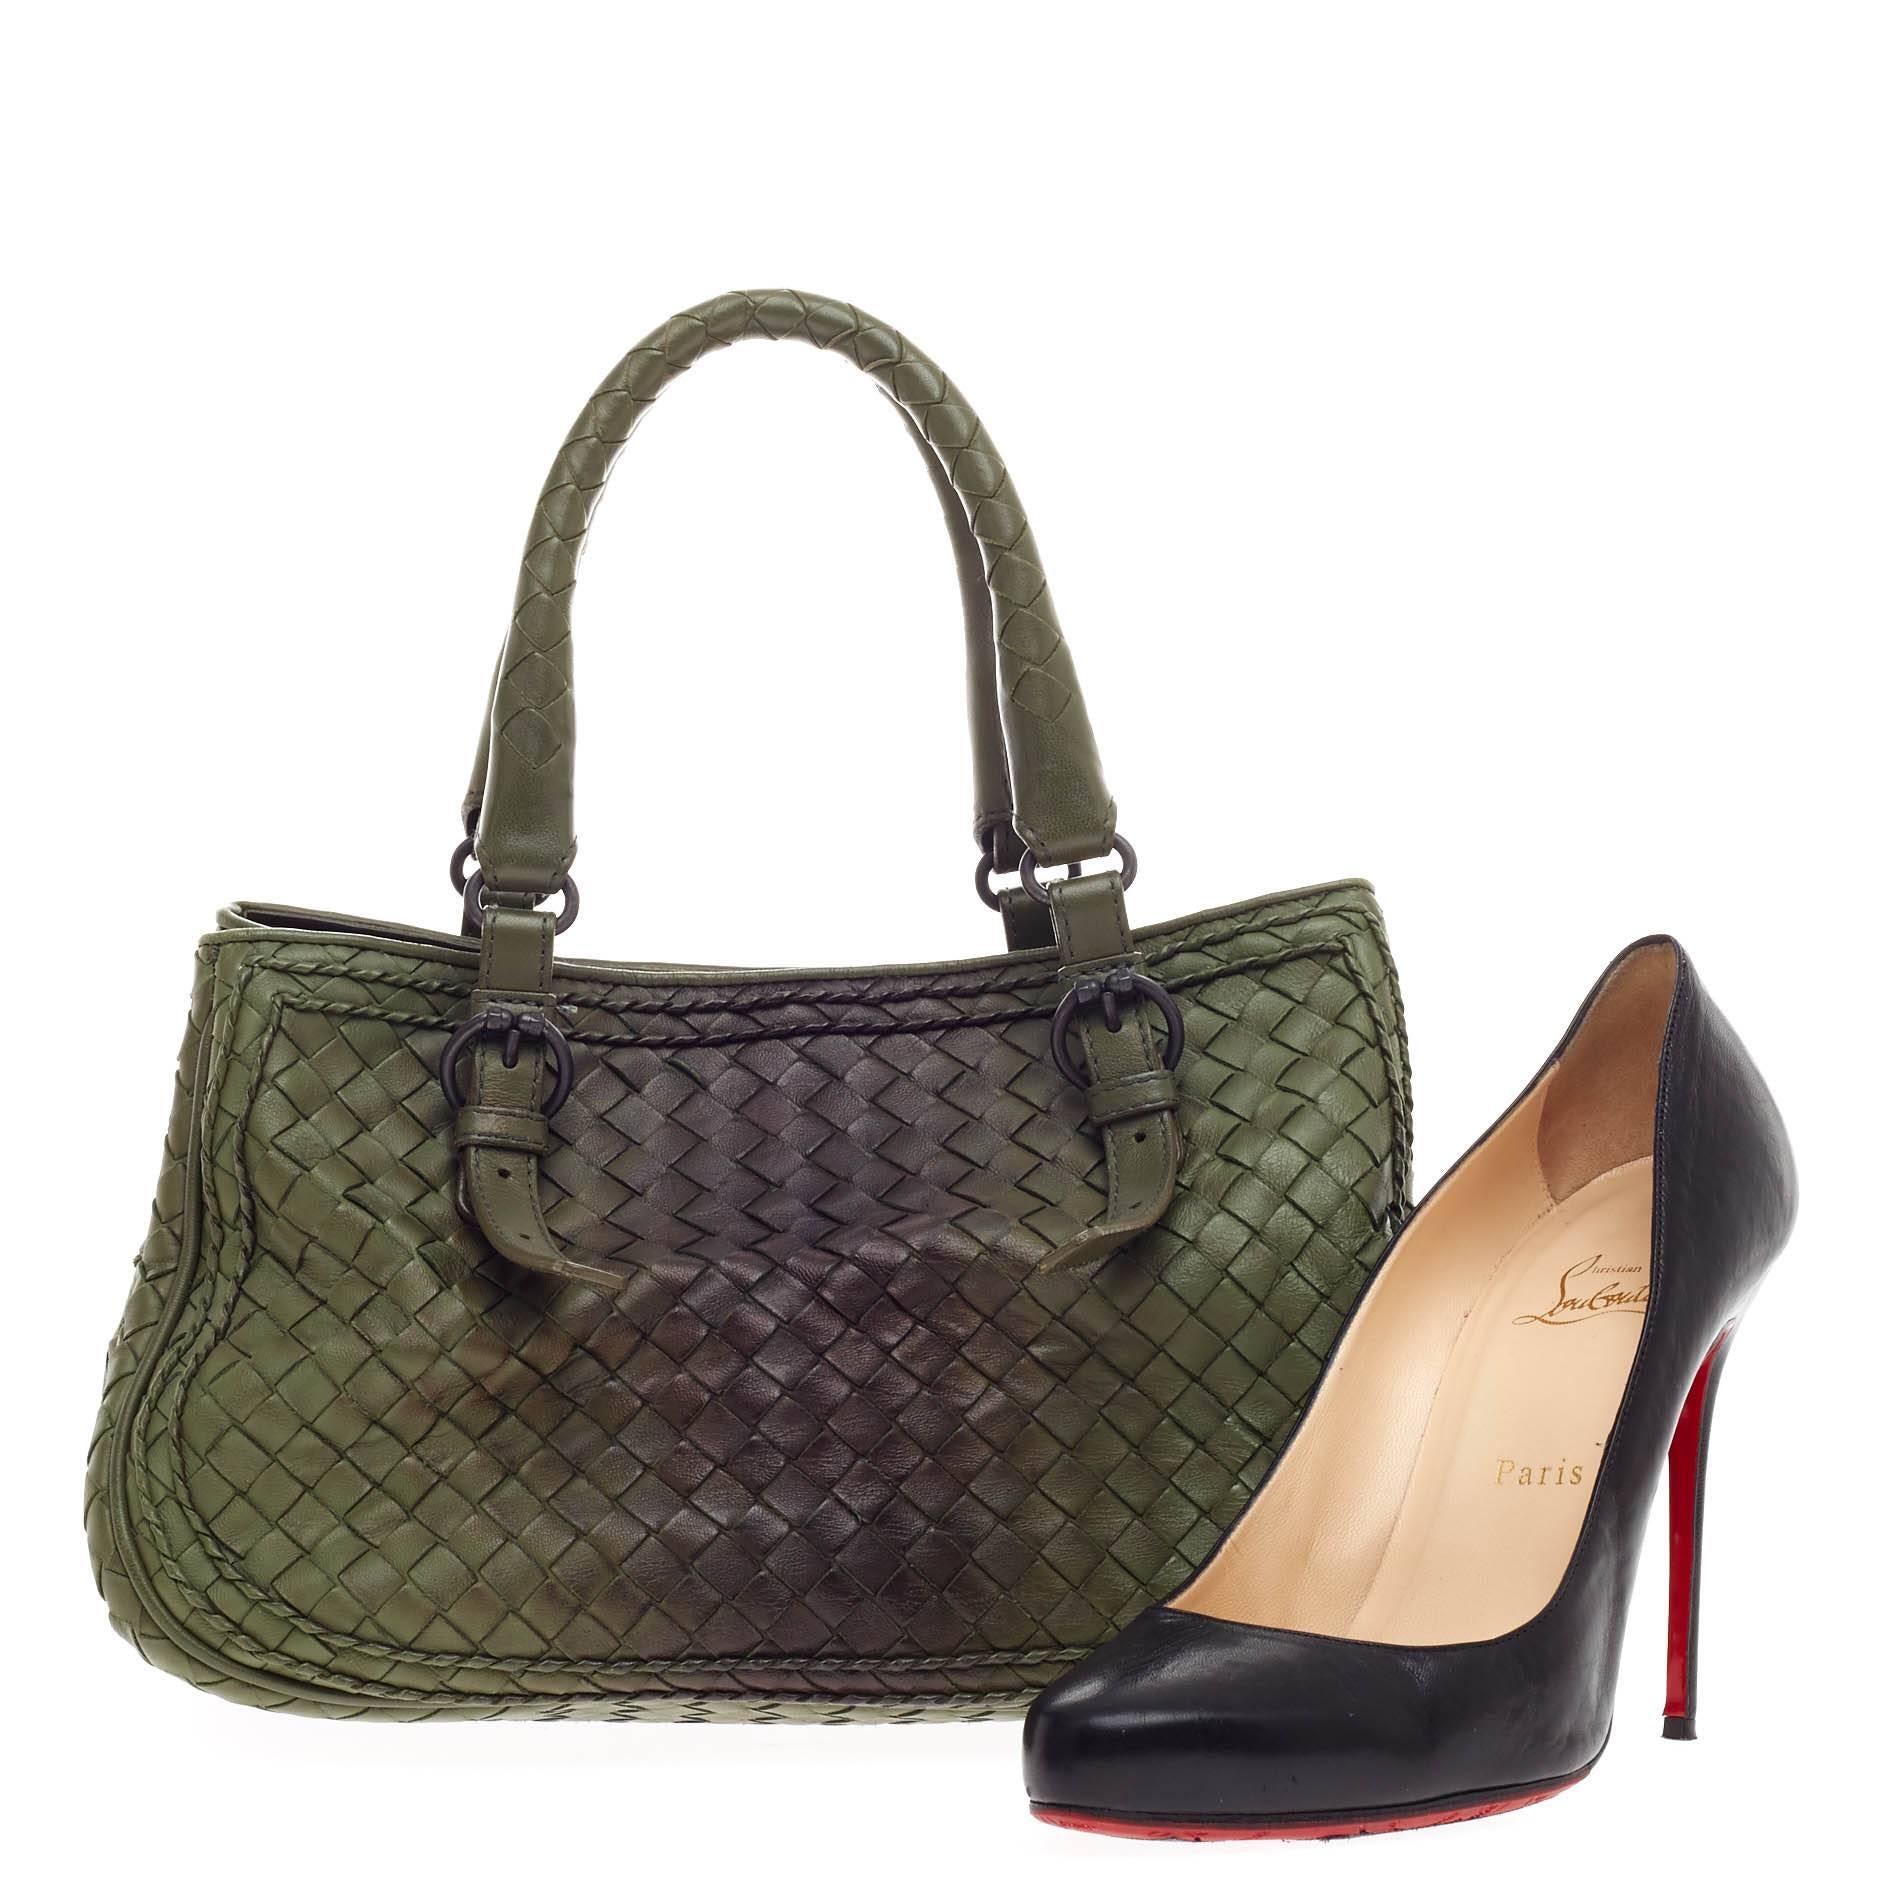 This authentic Bottega Veneta Belted Double Stitch Satchel Ombre Intrecciato Nappa Small presented in the brand's 2007 Collection is a timelessly elegant bag with a casual silhouette. Constructed from green and black nappa leather woven in Bottega